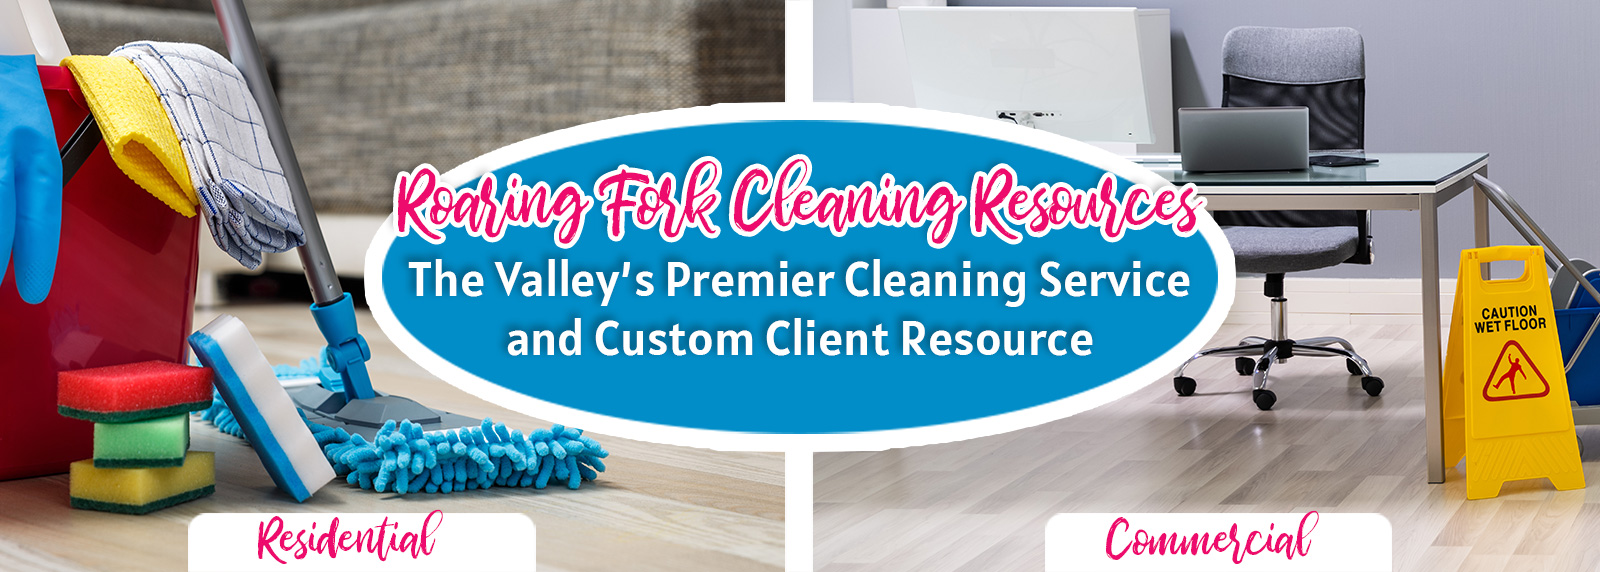 Roaring Fork Resources The Valley's Premier Cleaning Service